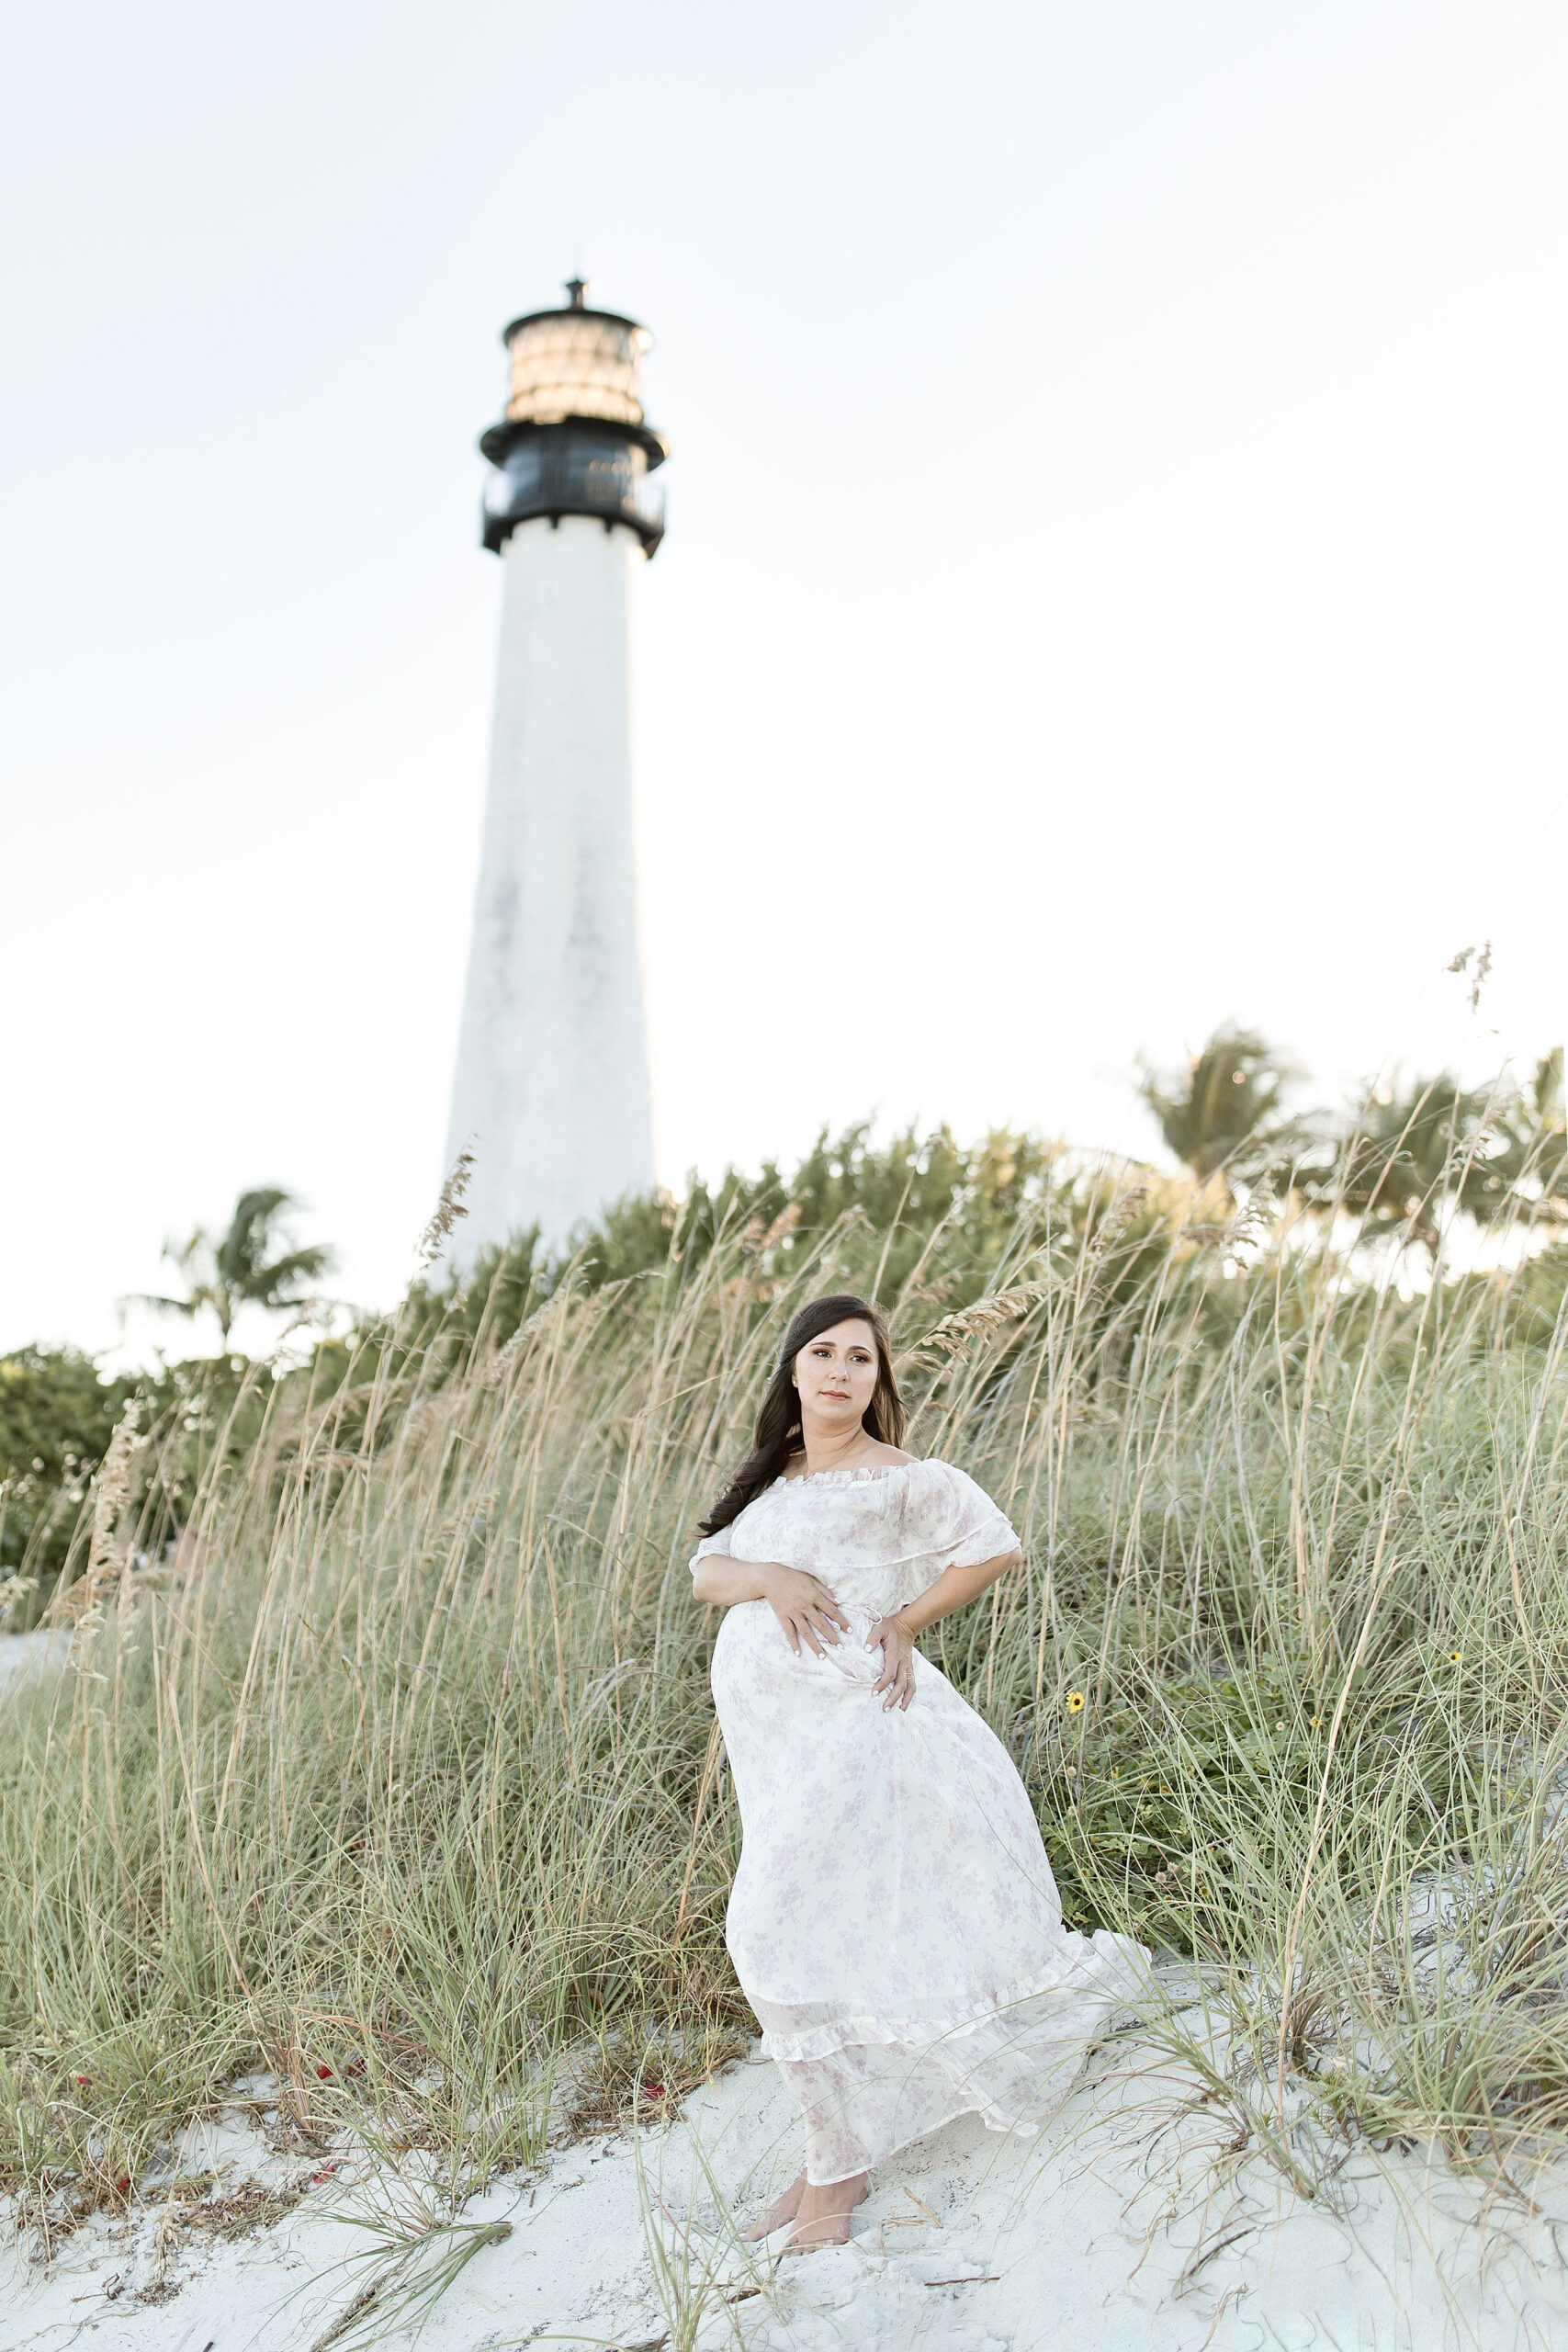 A mom to be stands on a windy beach dune by a lighthouse while holding her bump with help from maternal fetal medicine miami